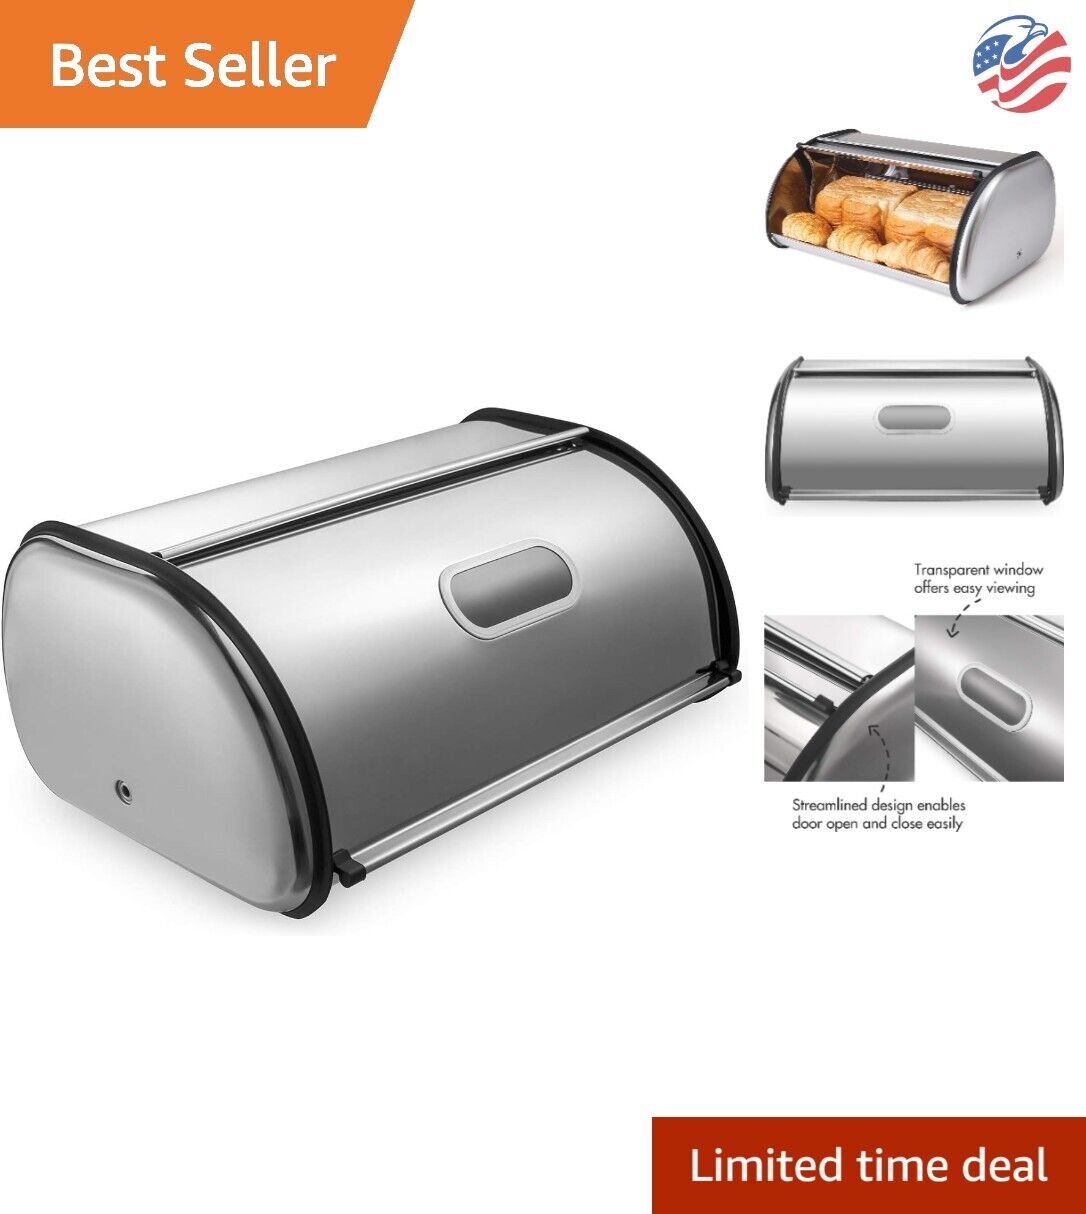 Durable Stainless Steel Bread Box - Spacious Roll-up Lid, Fingerprint Proof